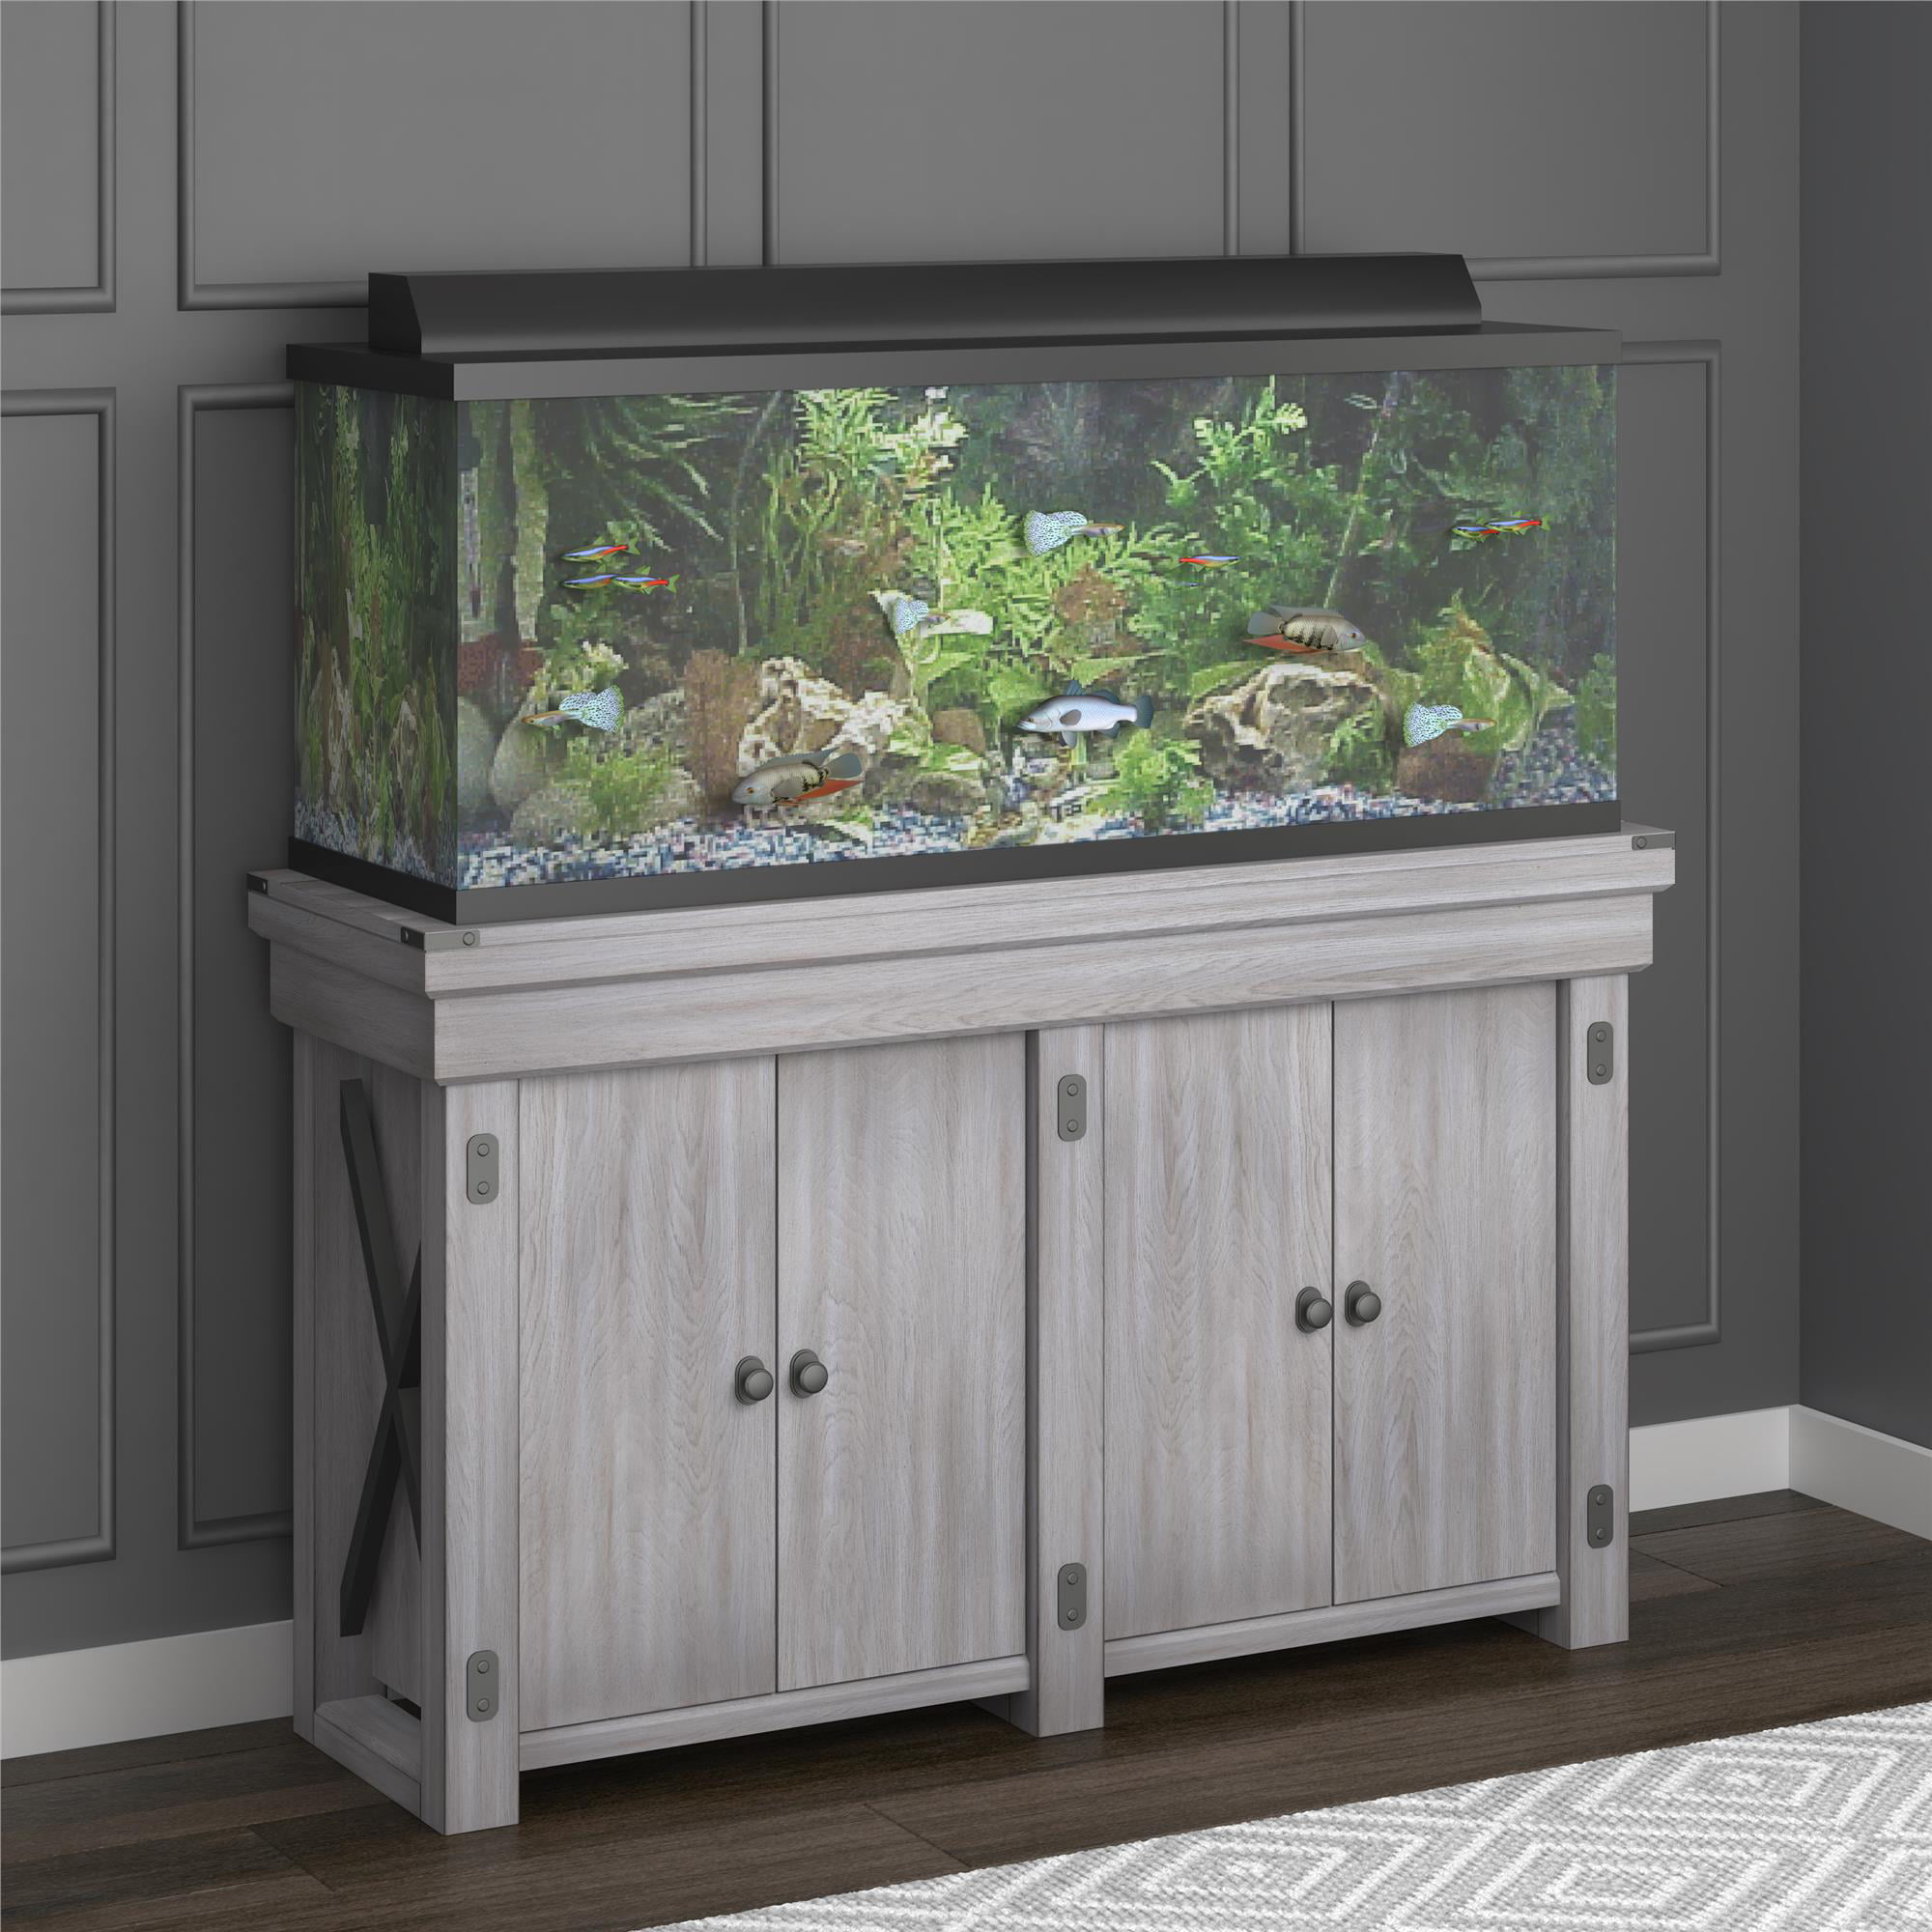 Diy 55 Gallon Fish Tank Stand : Cheapest And Easiest Diy Aquarium Stand ... - 532c23D3 B098 4126 A57f 04be36cb49aD.f23a23878e1405acea55abce4D36c2ce